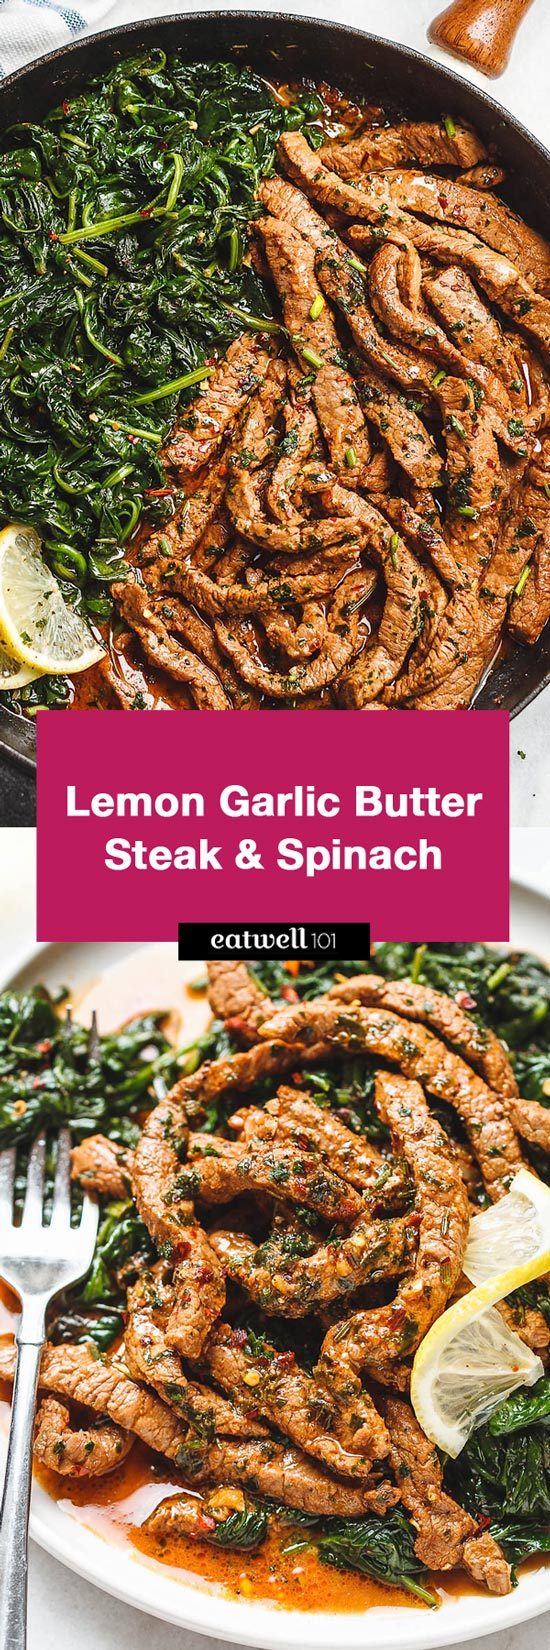 Lemon Garlic Butter Steak with Spinach - #eatwell101 #recipe - Tons of flavor and so easy to make! A quick low carb dinner you’ll be crazy about.